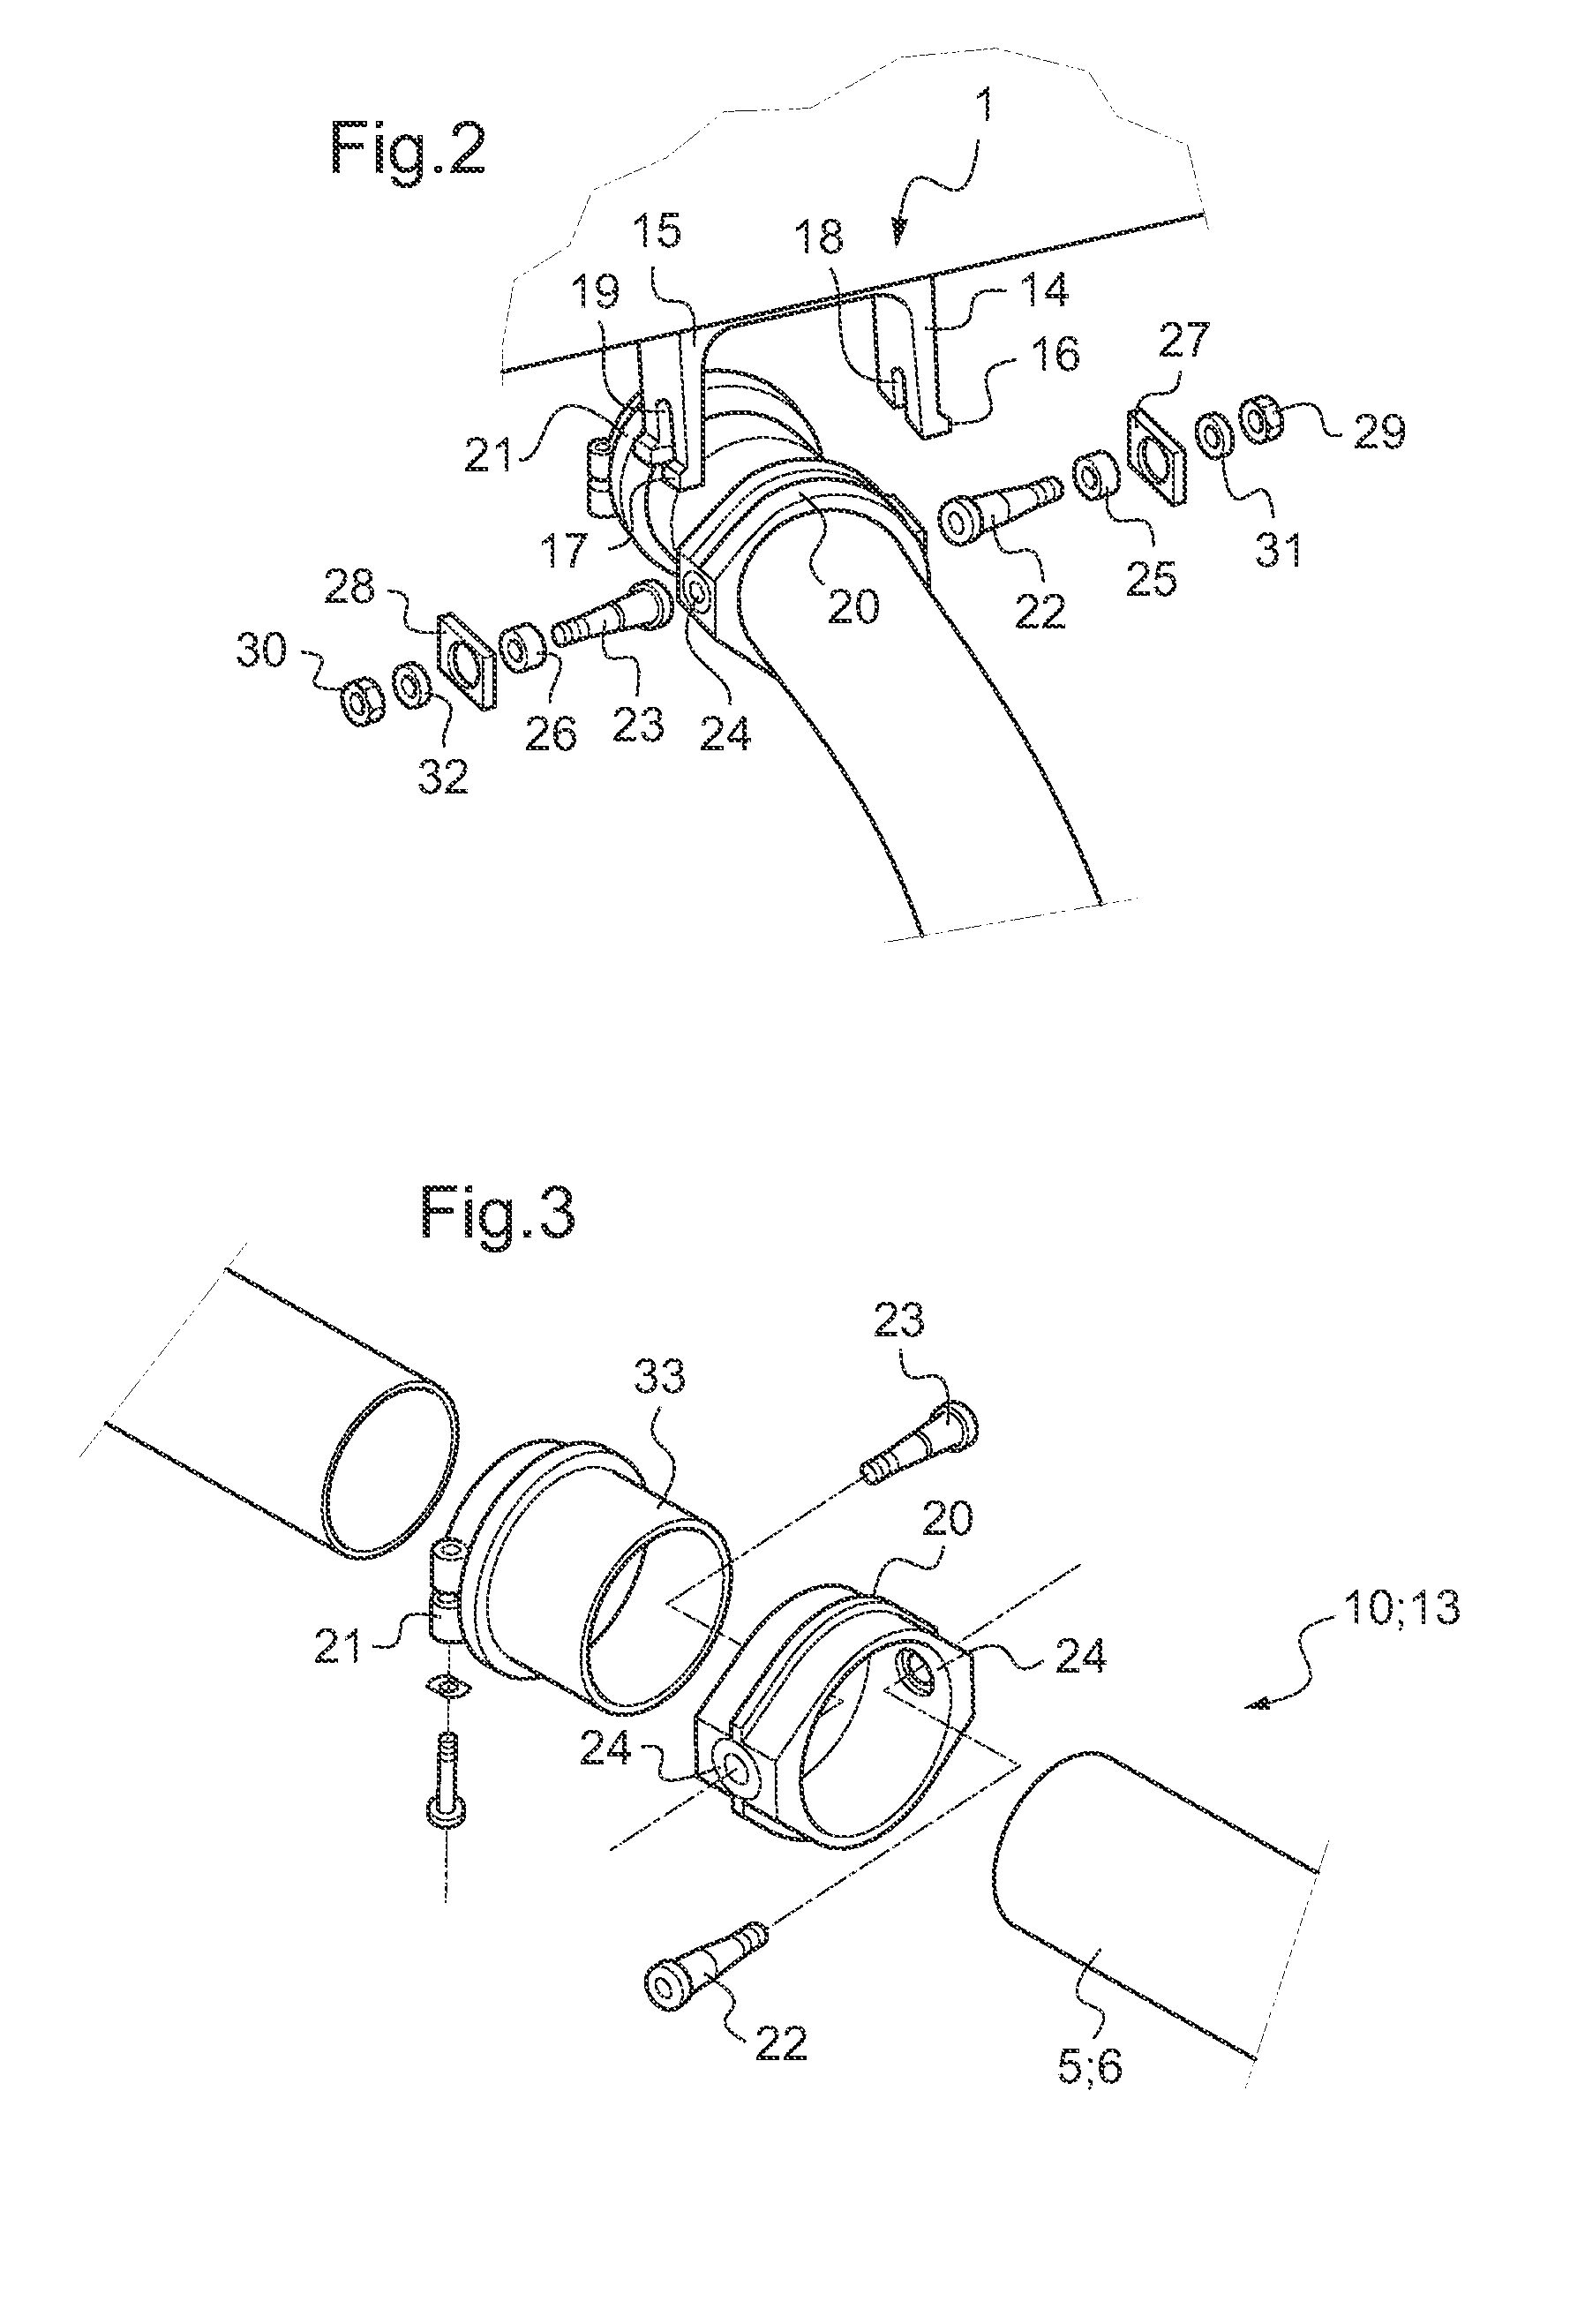 Weighing system and methods of operating such weighing system